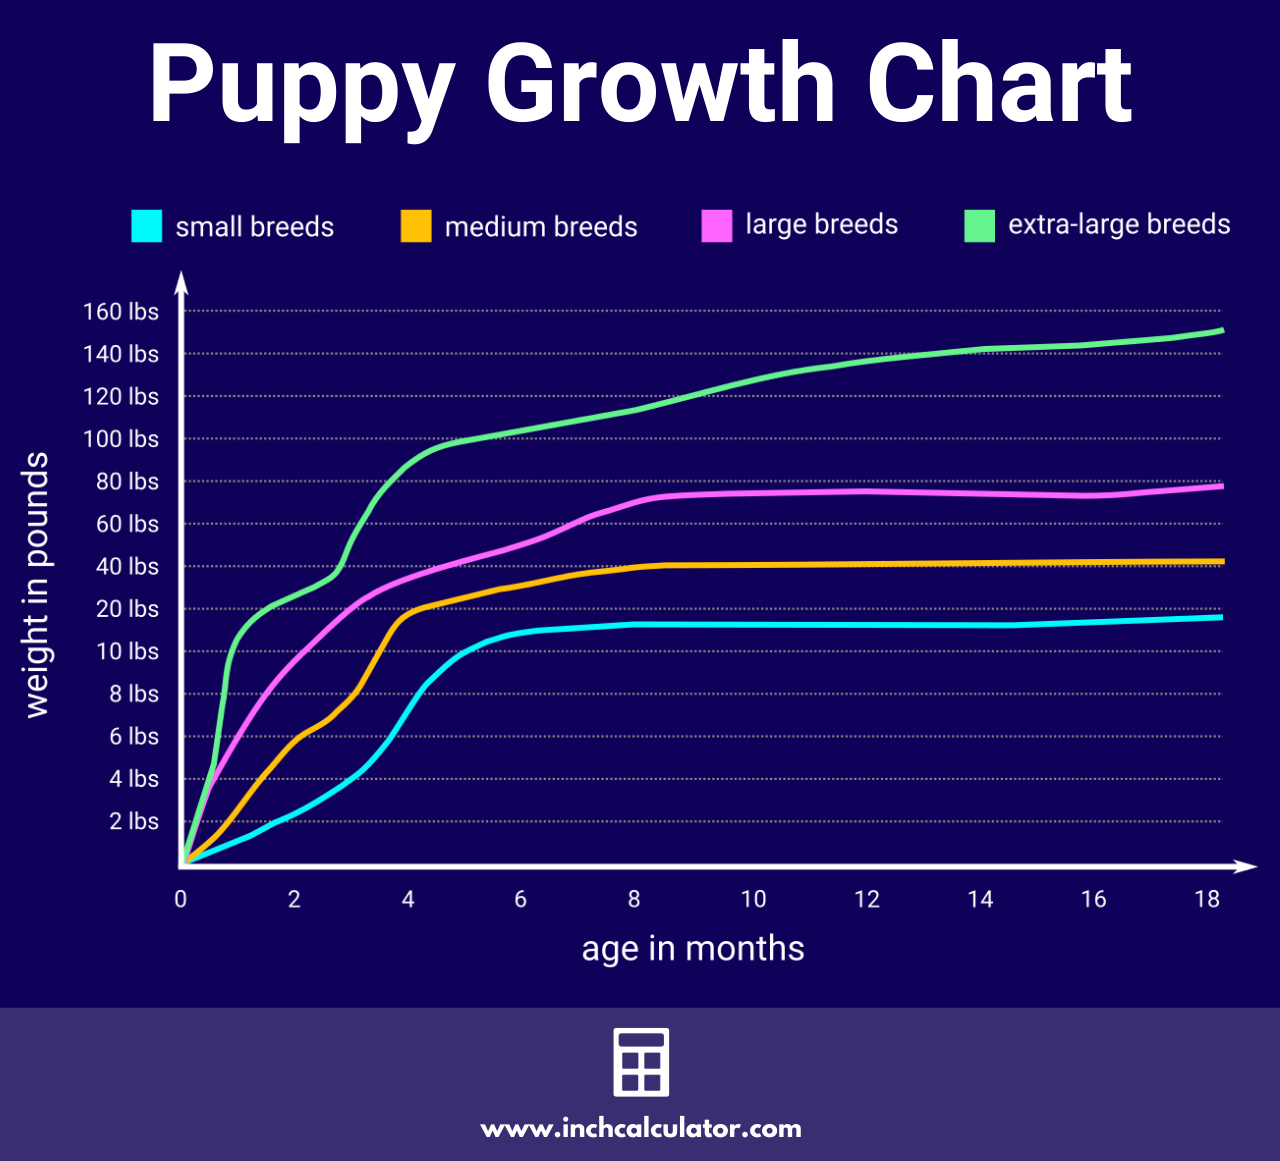 Chart showing the growth progression for a puppy and when they reach their adult weight, broken down by breed size